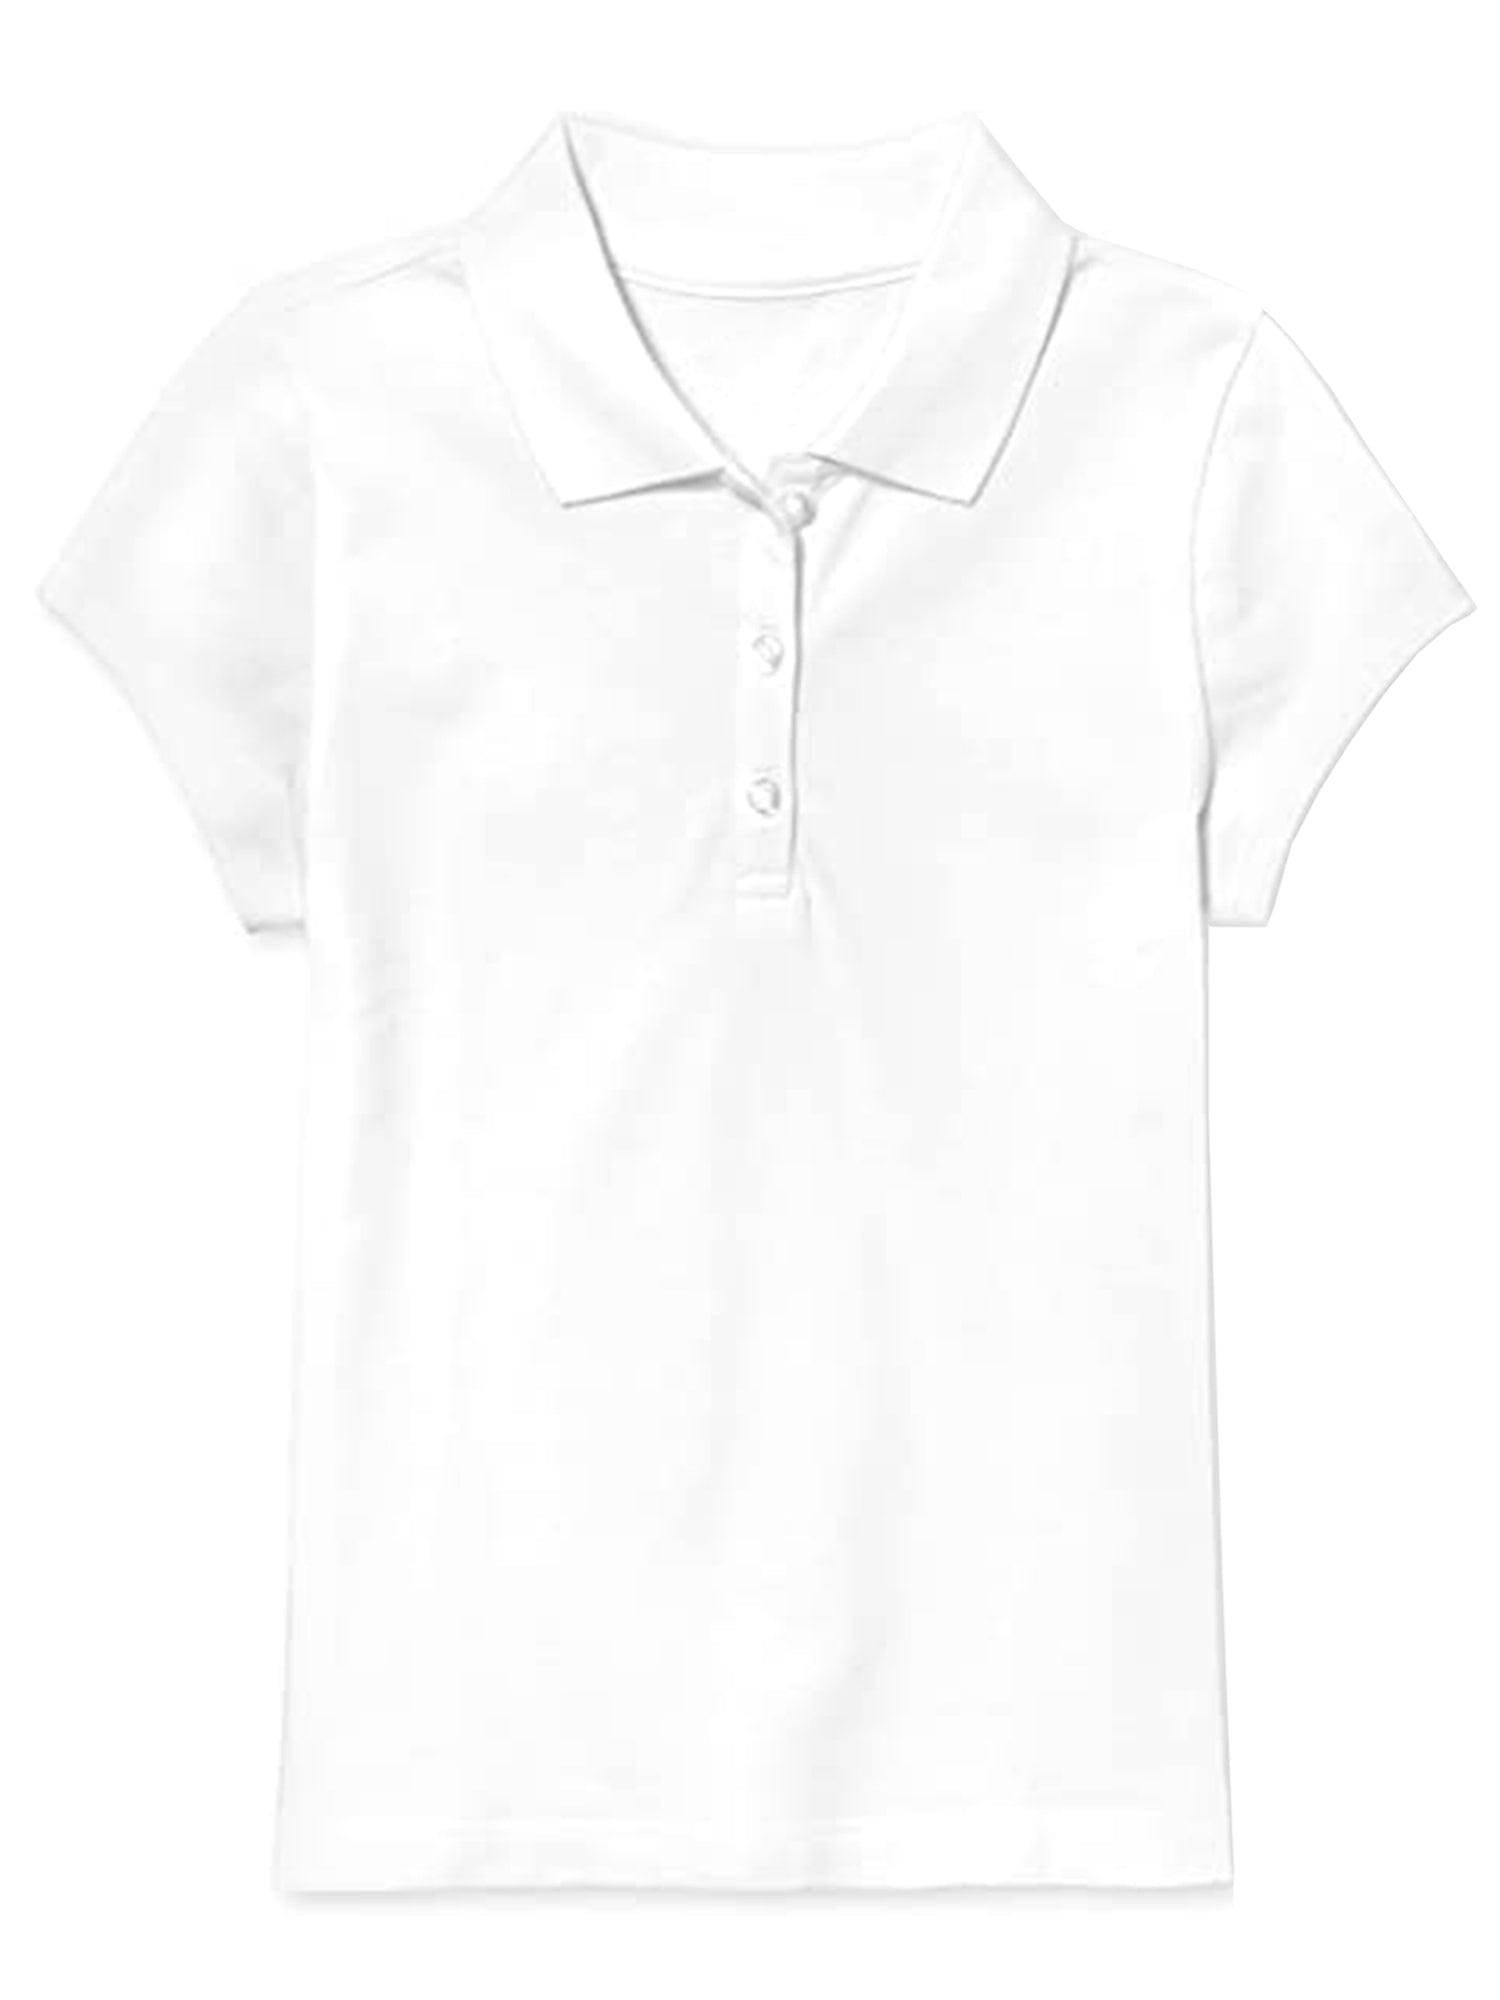 Girl's Short Sleeve Polo Shirt (Sizes S-2X) - GalaxybyHarvic